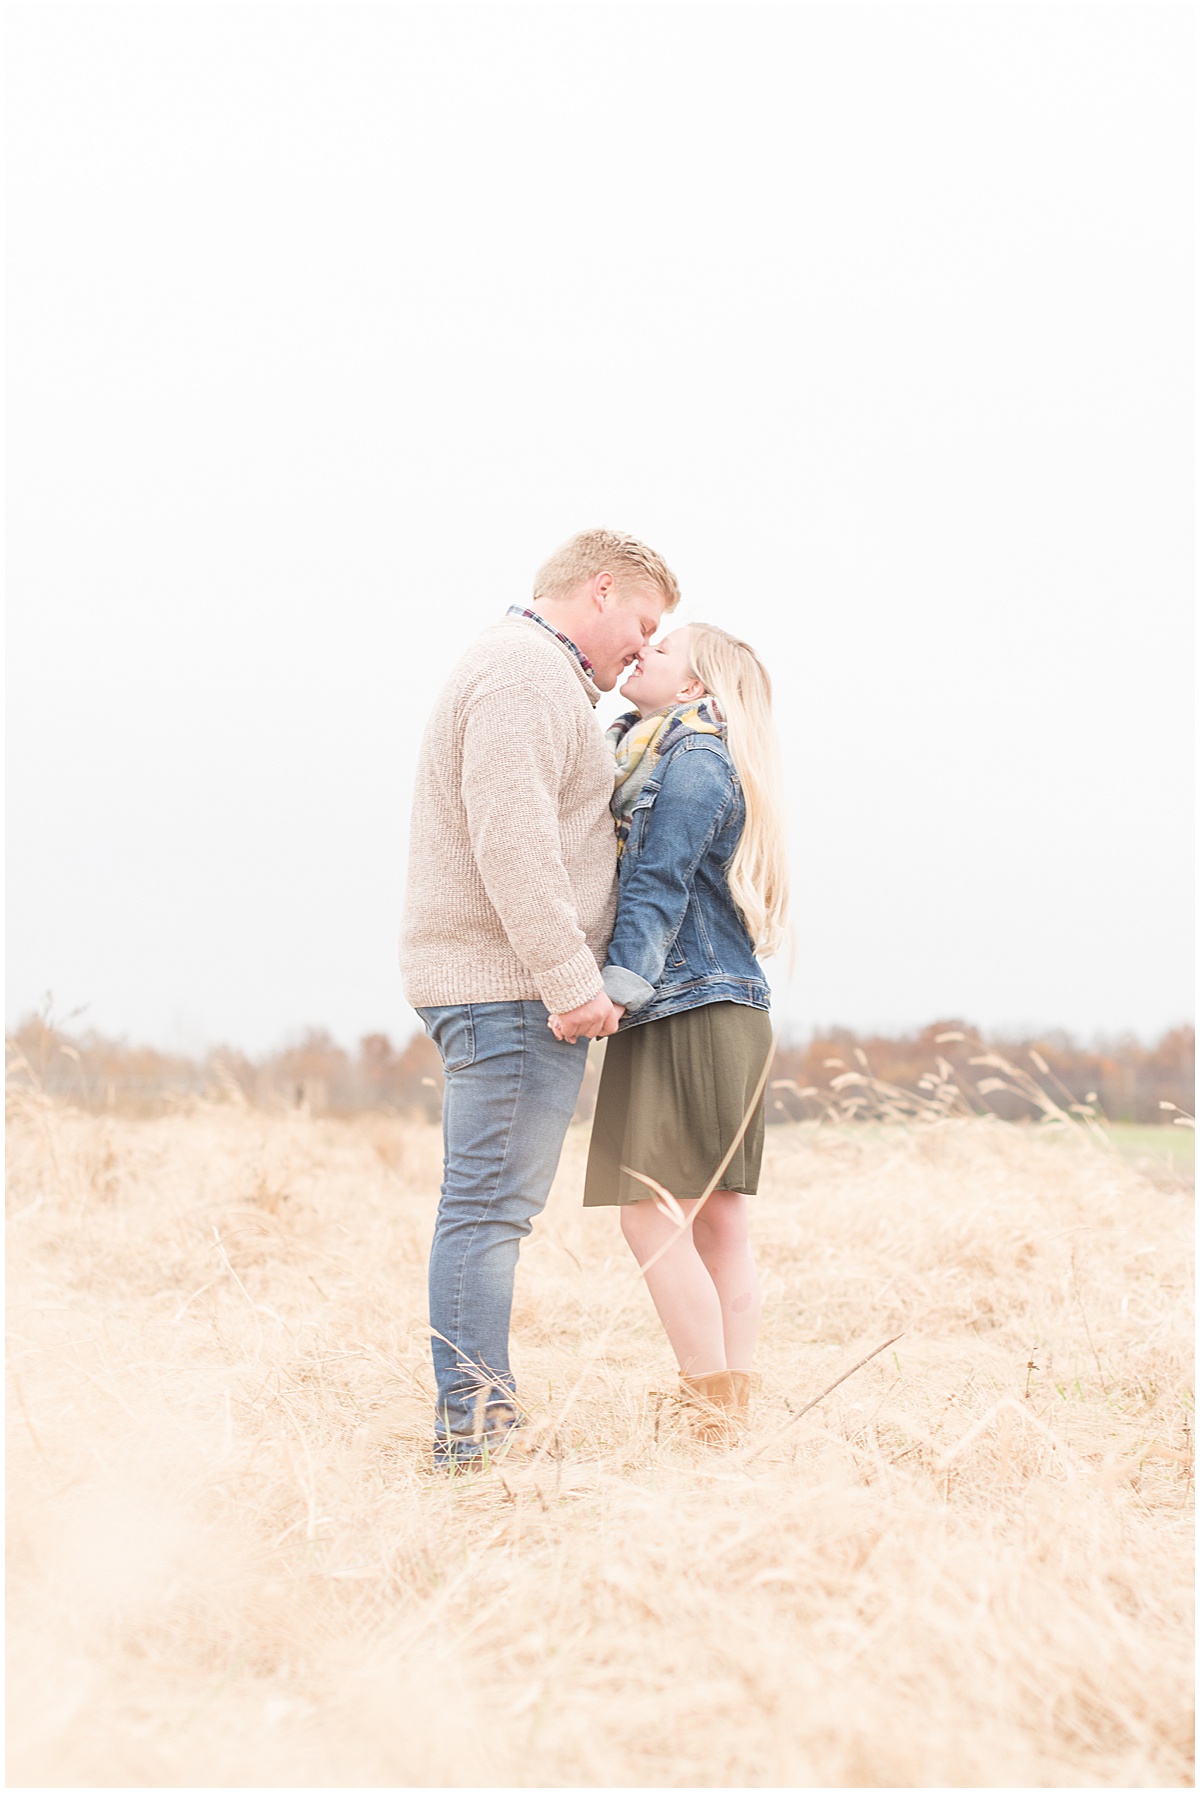 Tyler Van Wanzeele and Baileigh Fleming engagement photos at Wea Creek Orchard in Lafayette Indiana19.jpg